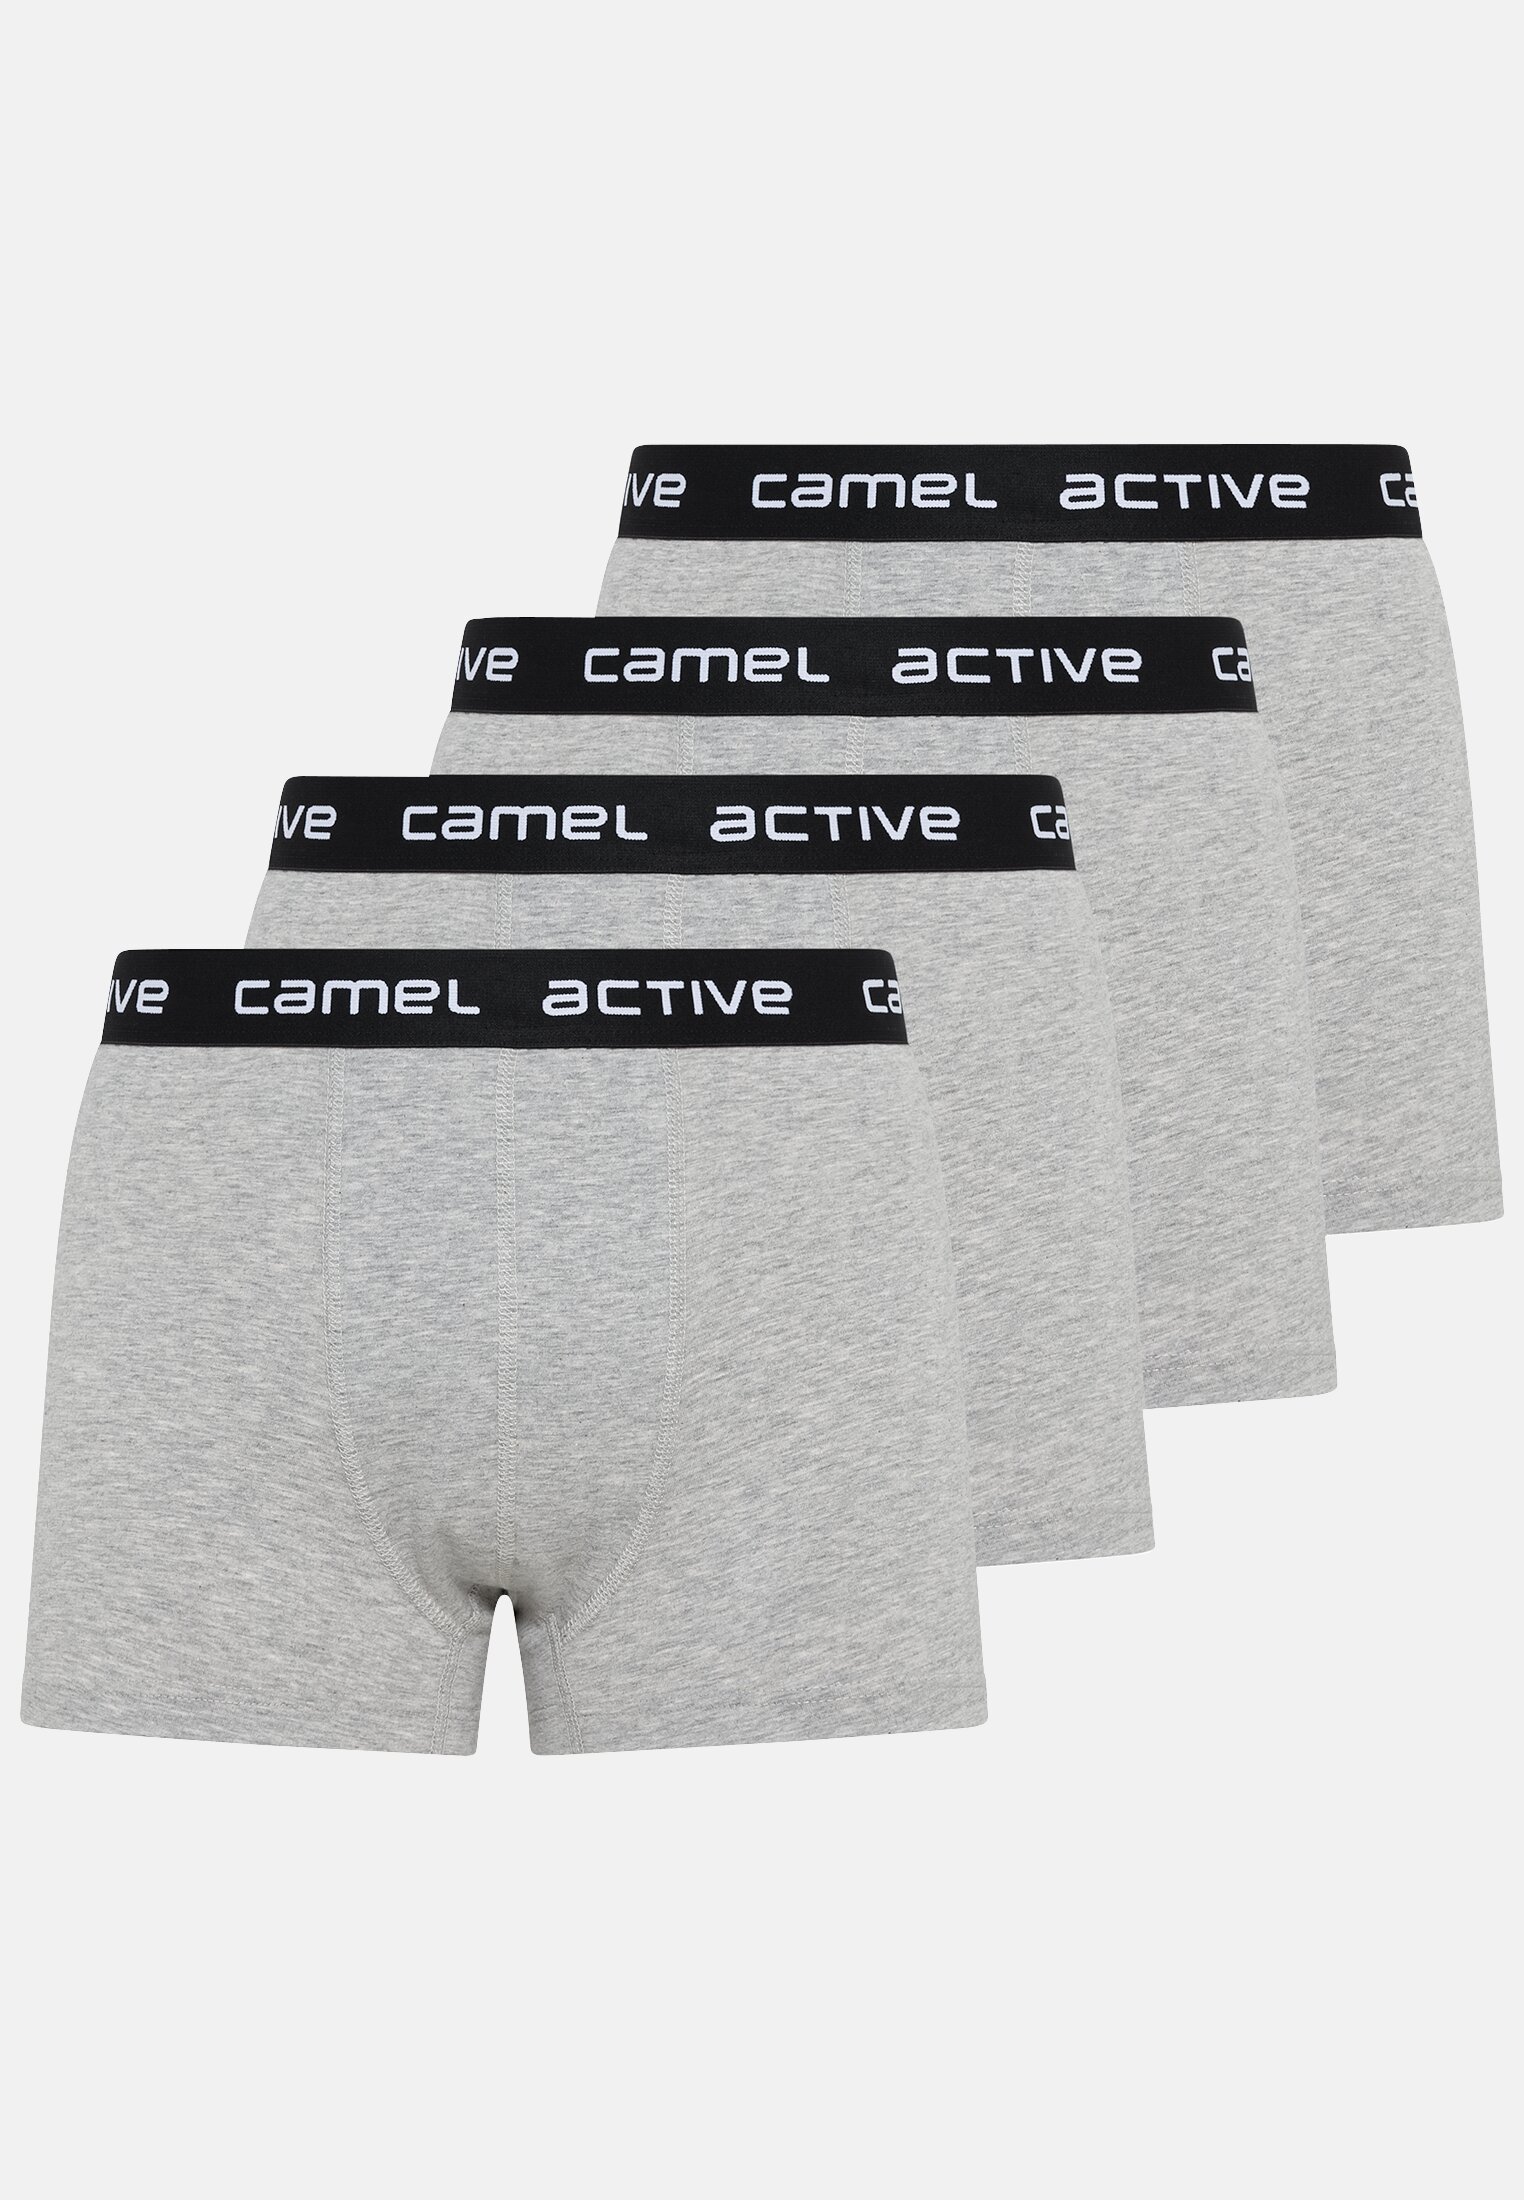 Camel Active Boxer shorts in a set of 4